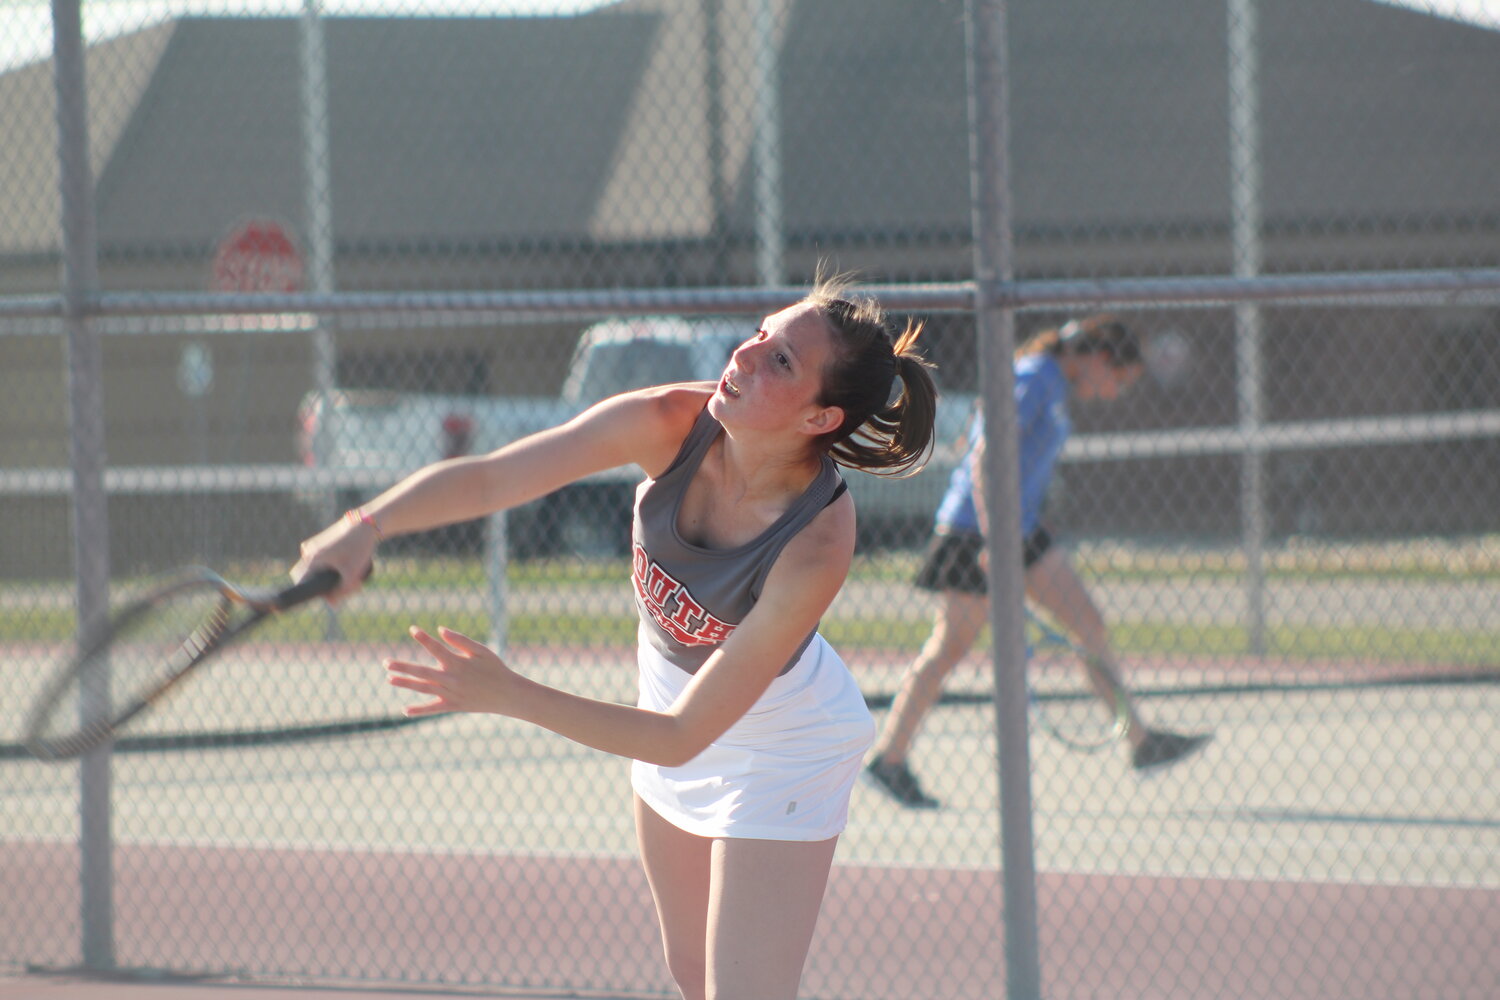 Junior Kela Johnson continued her undefeated season at 3 singles for the Mounties with a 6-2, 6-1 win.